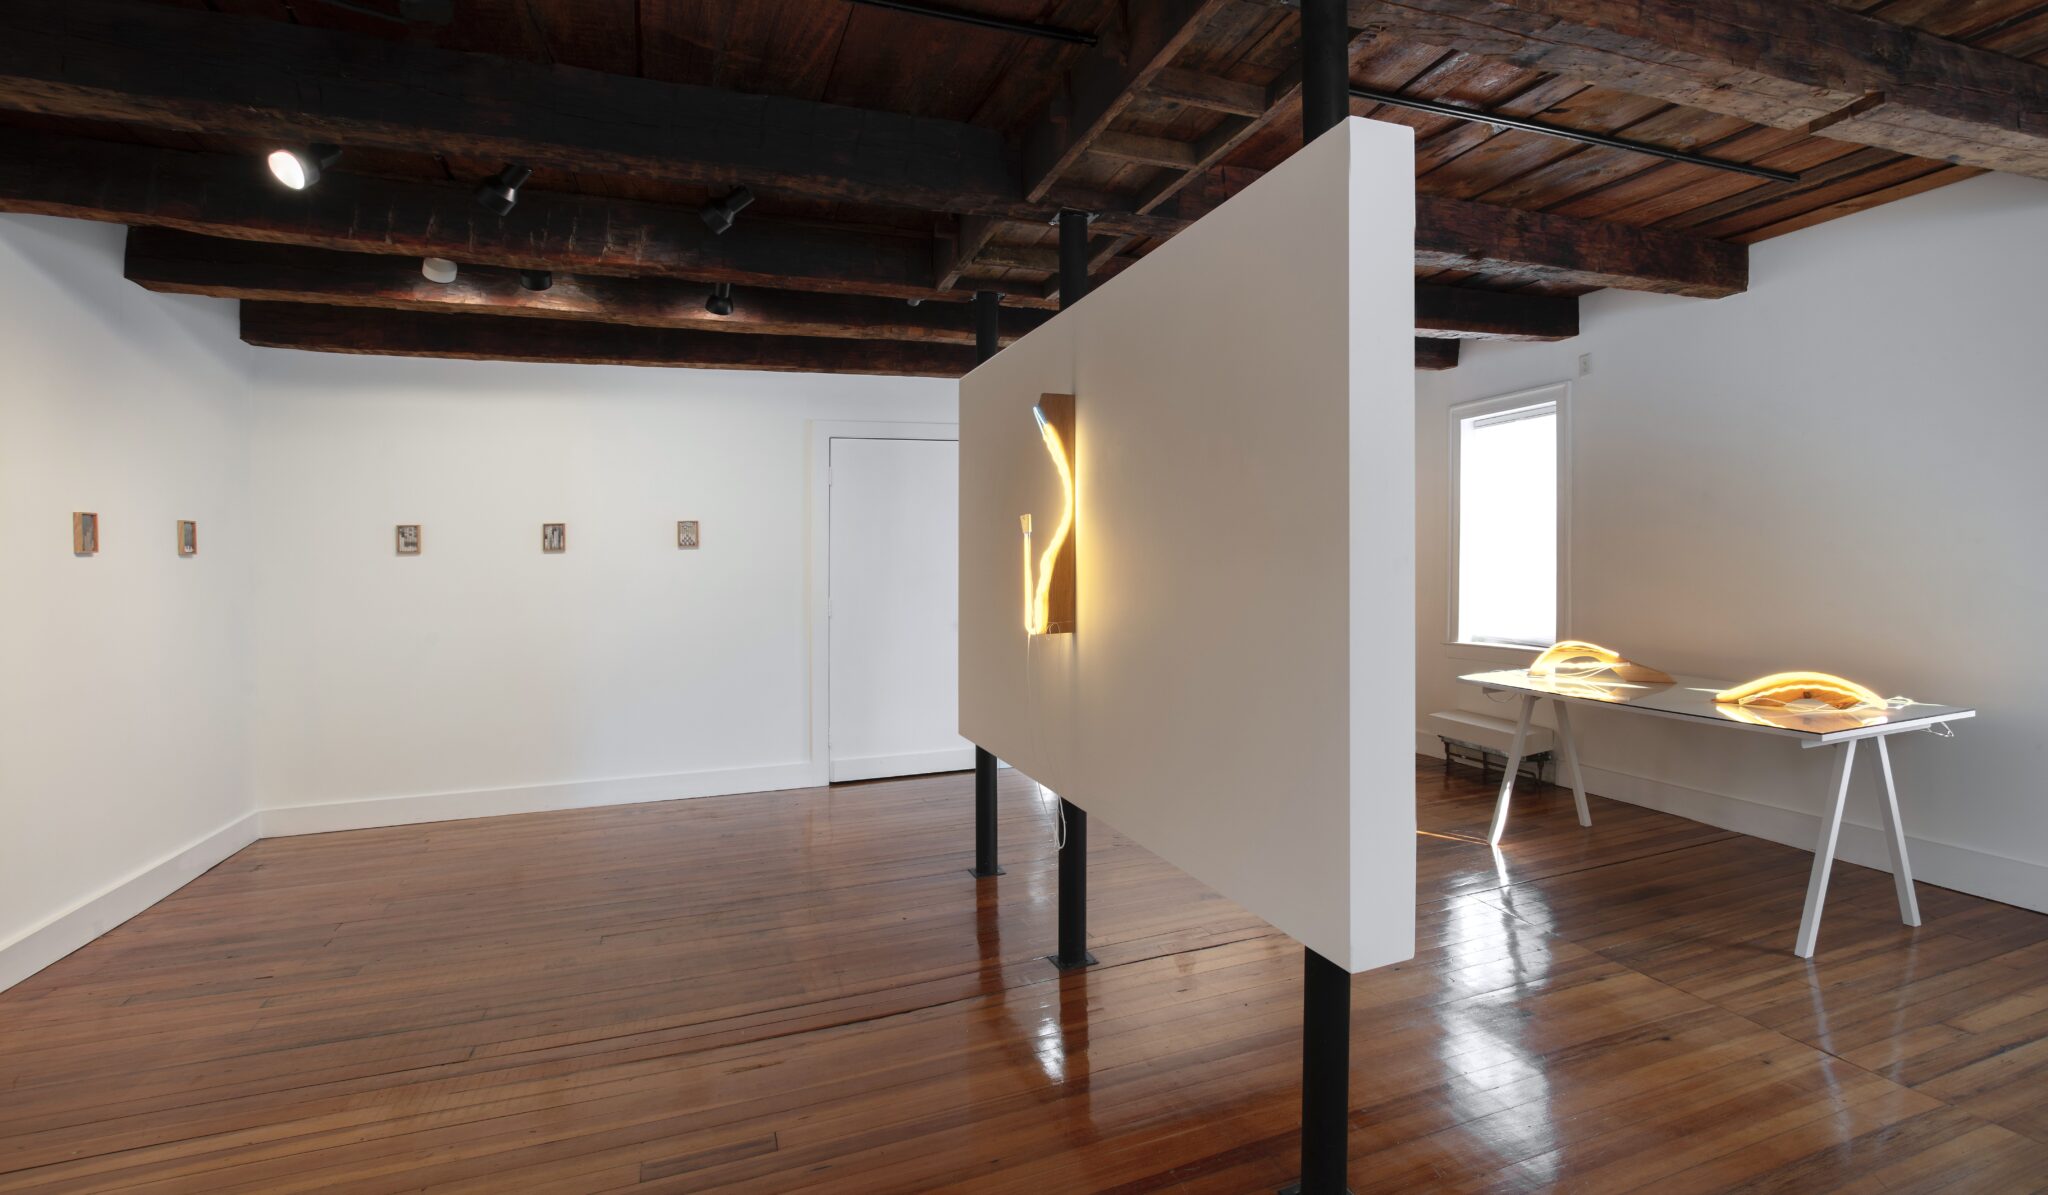 Installation view, Light Trail, works by Abby Flanagan and Mariko Makino